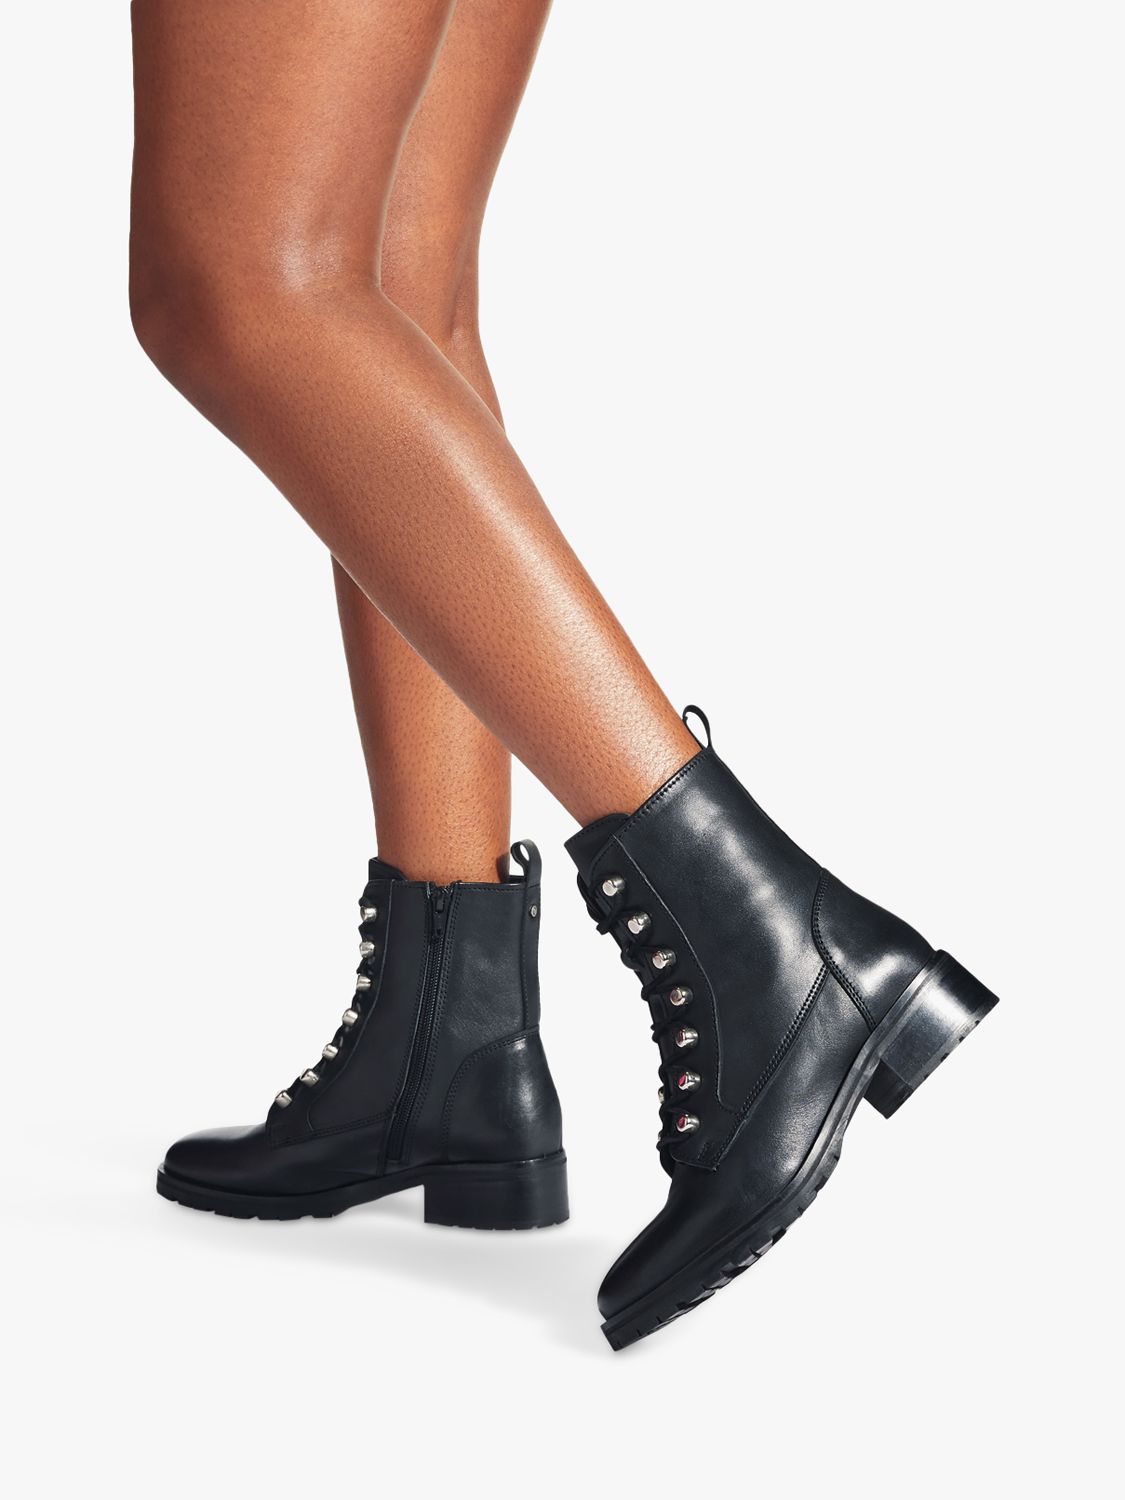 Carvela Steam Leather Lace Up Ankle Boots, Black at John Lewis & Partners